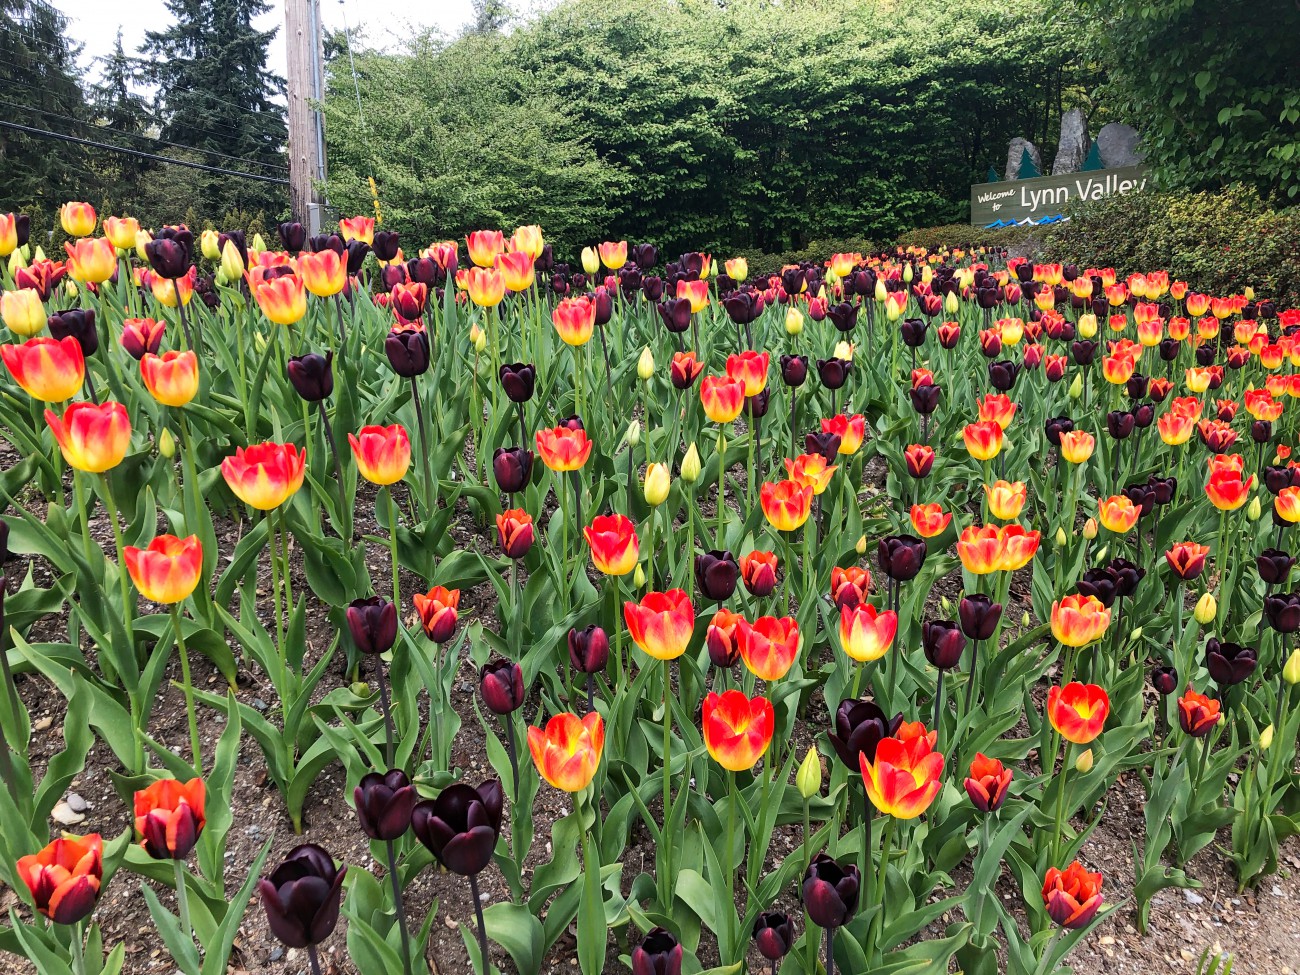 A large floral display of black velvet and reddish yellow dahlias with a sign in the background that reads Lynn Valley.